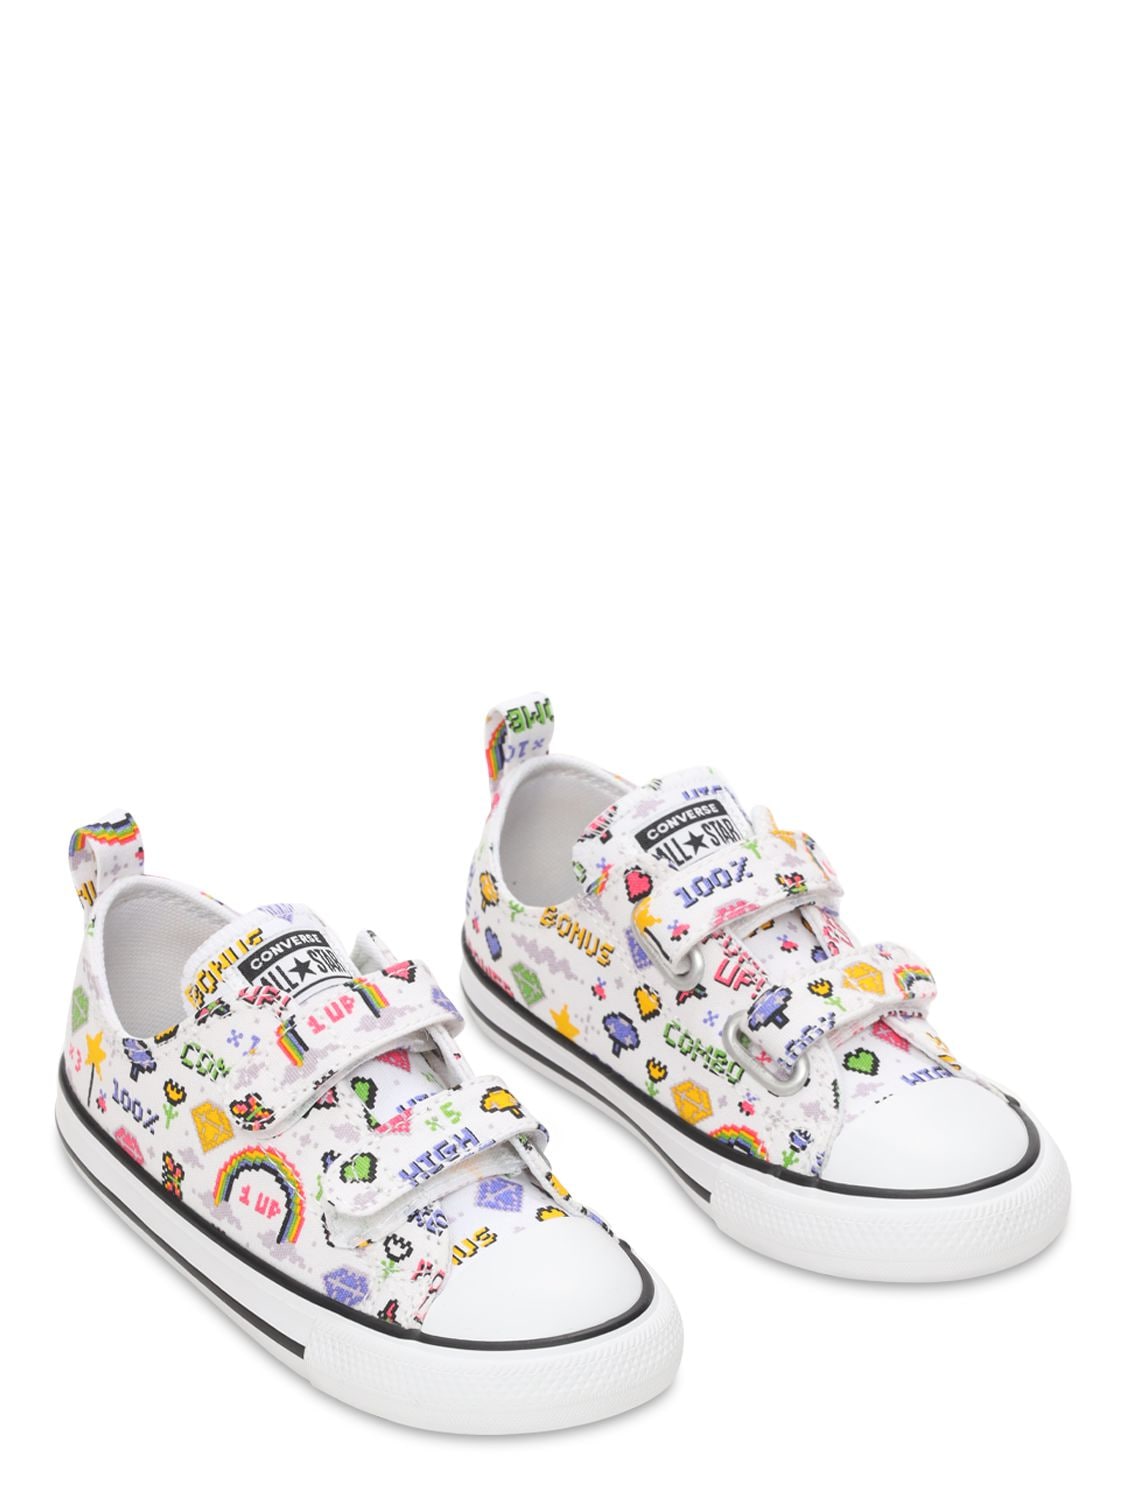 Converse Kids' Gamer Print Chuck Taylor Sneakers In Multicolor